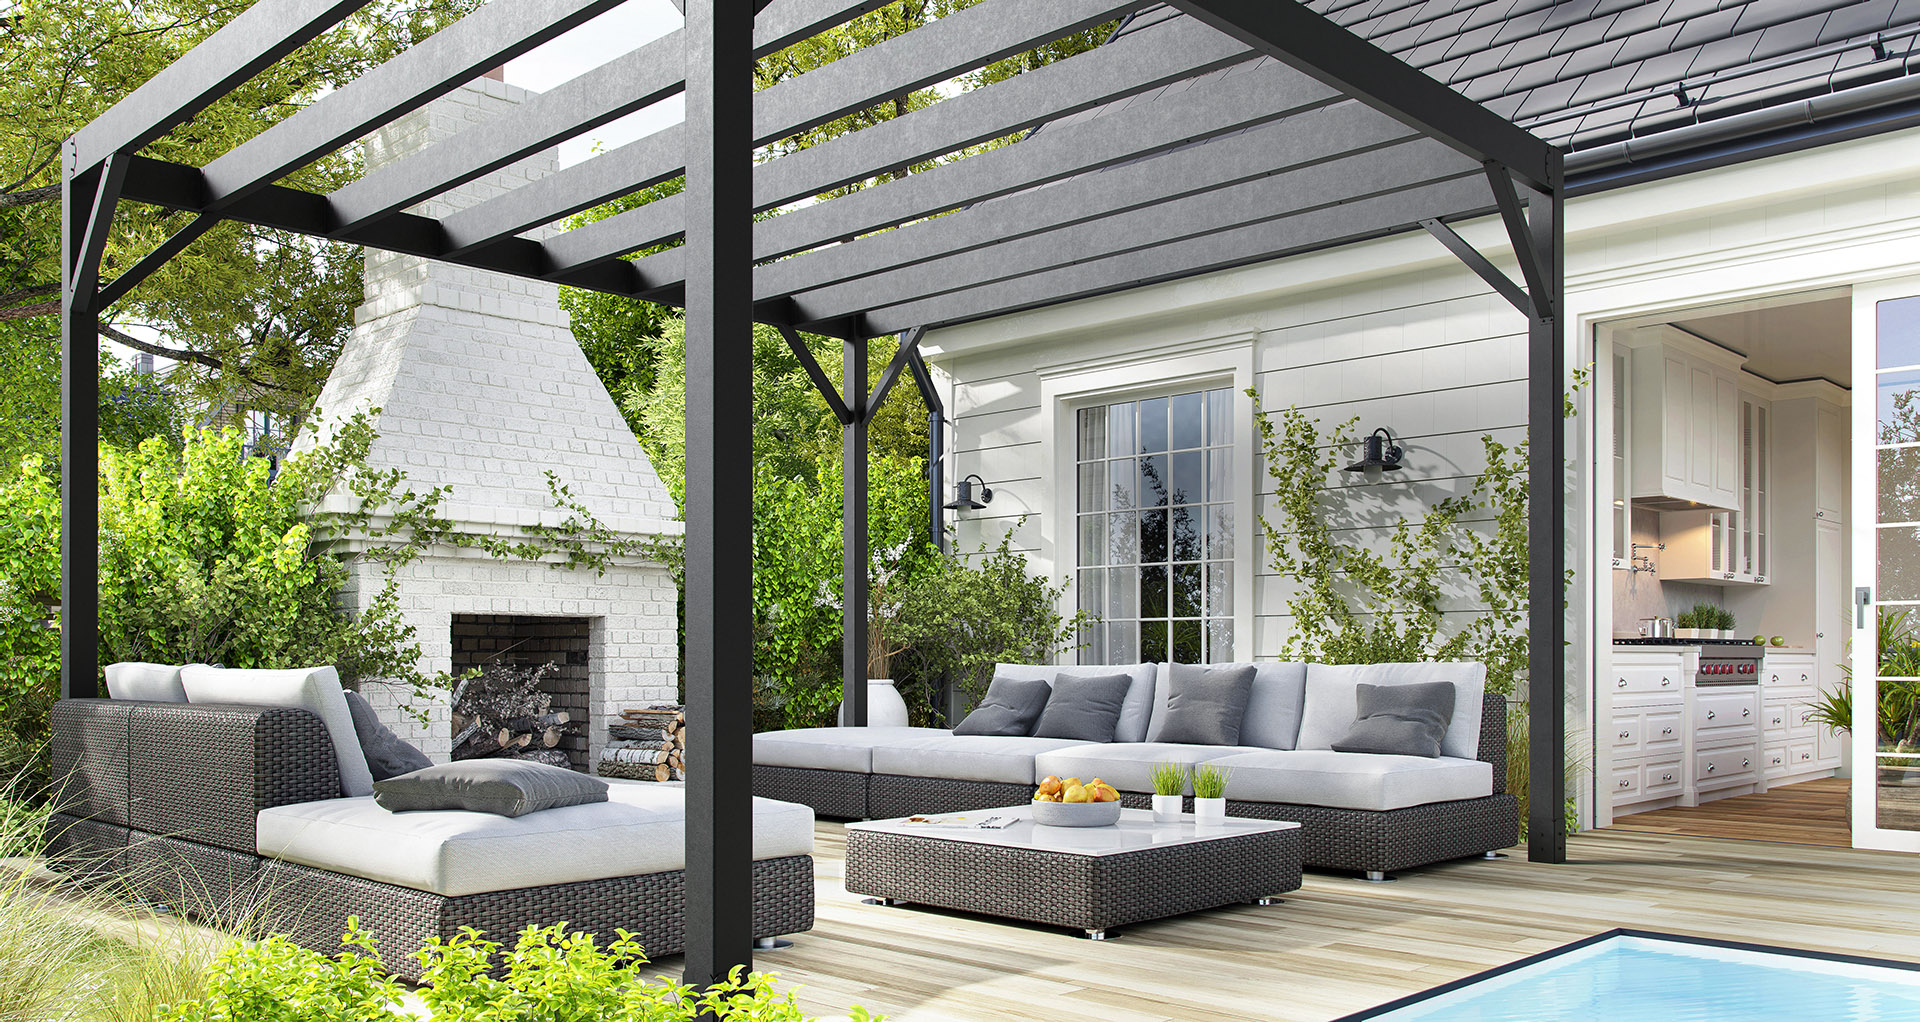 Backyard patio under a steel pergola next to a white brick outdoor fireplace.